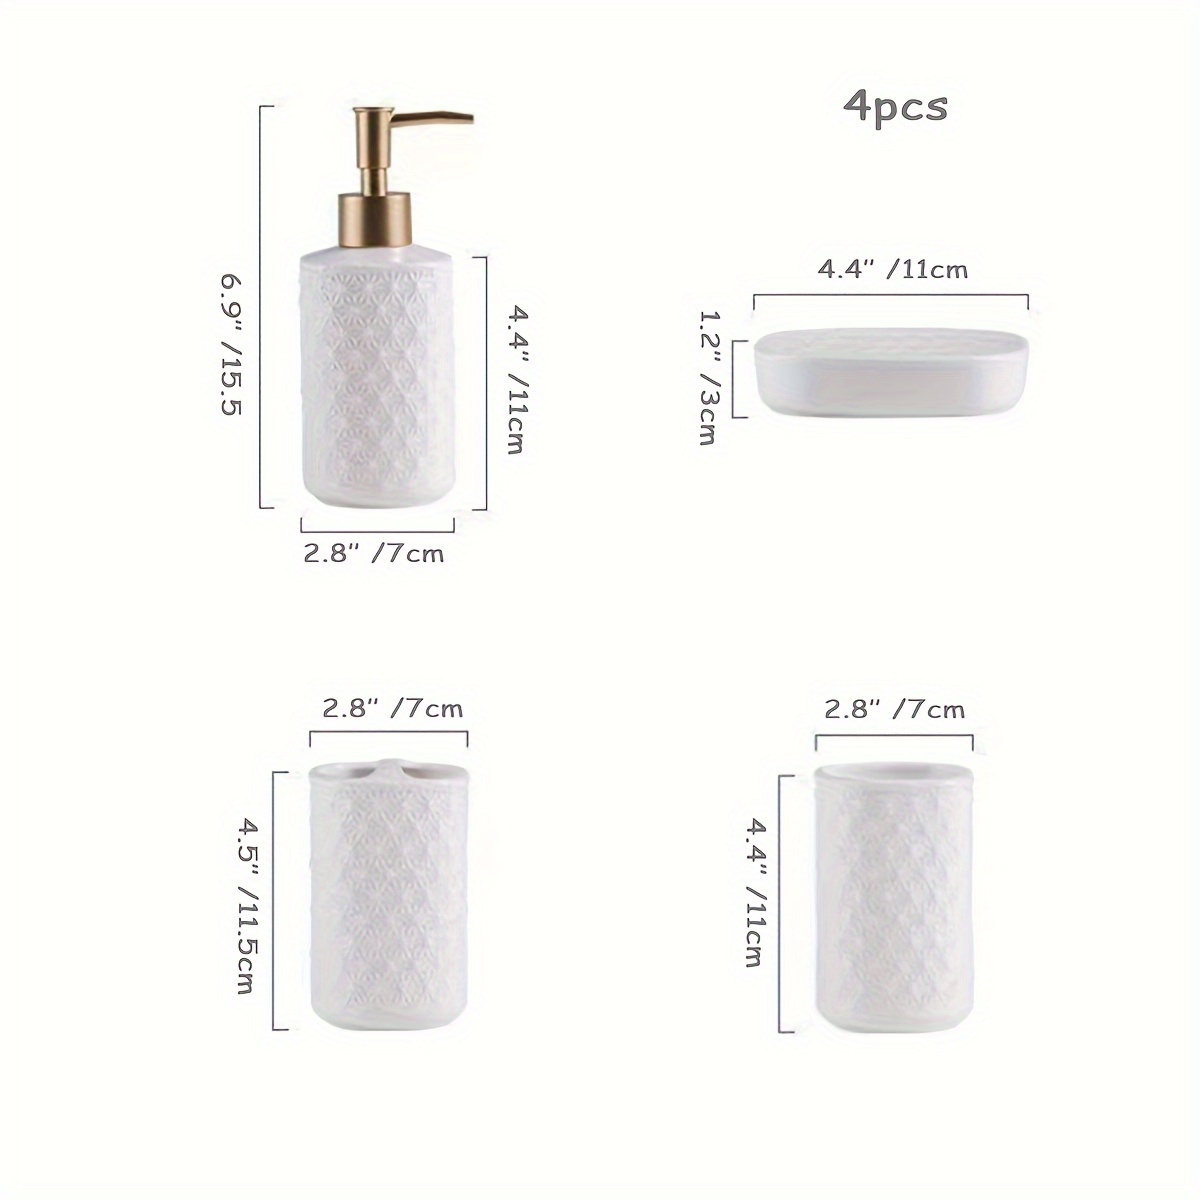 White 4-Piece Bathroom Accessory Set, Embossed Powder Blue Leaf and Branch  Pattern Includes Pump Dispenser, Tumbler, Toothbrush Holder, Soap Dish